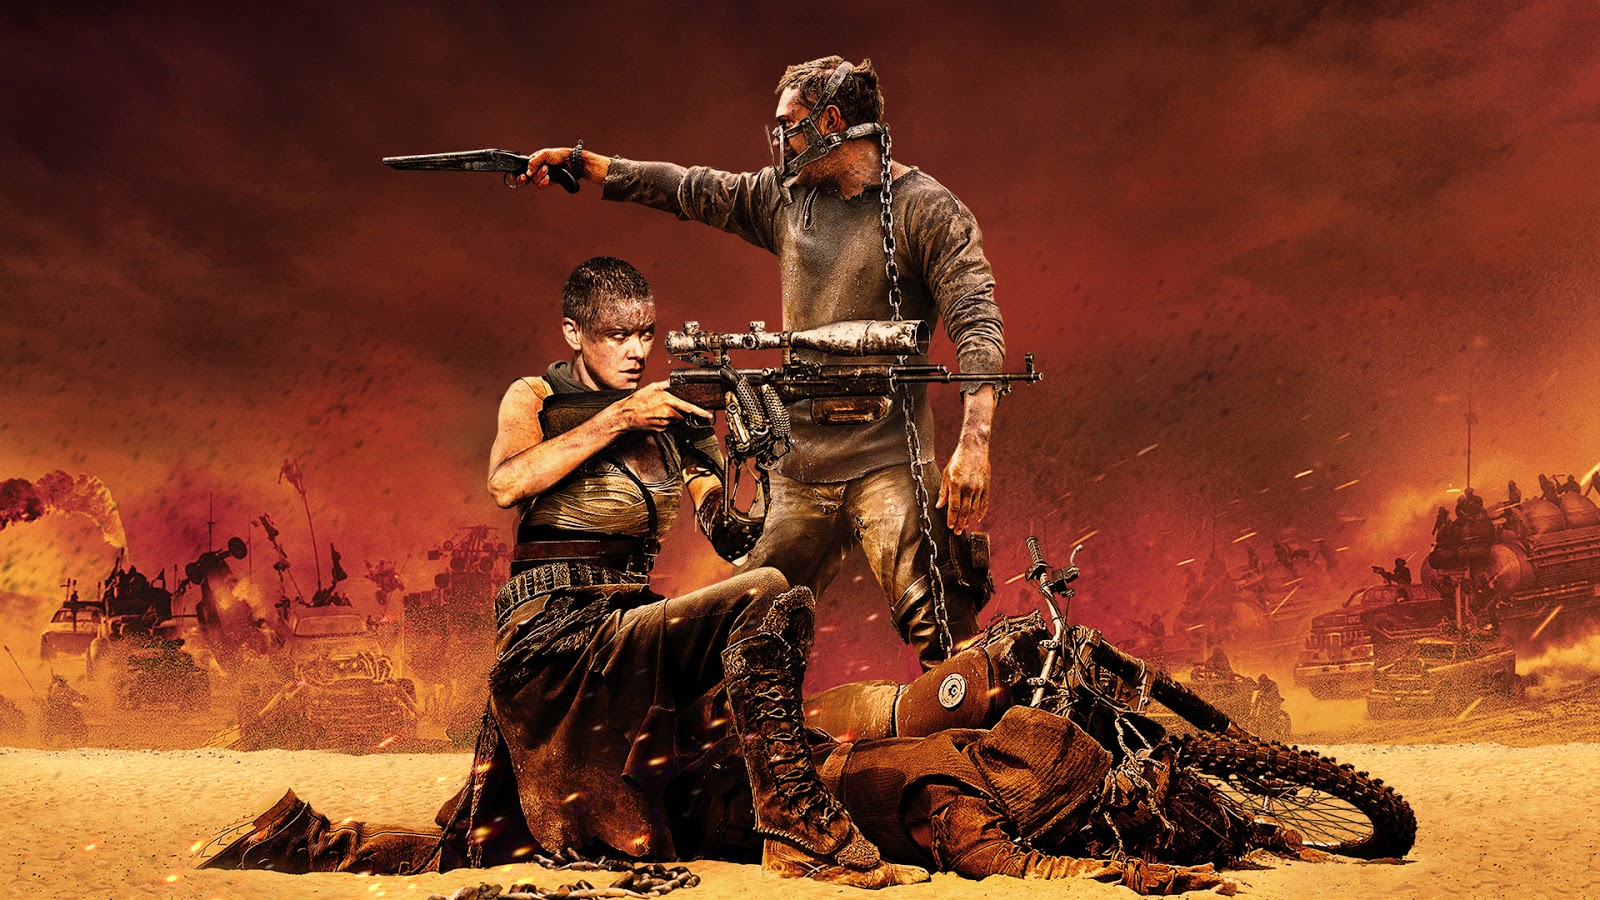 Wallpaper For Pc Mad Max Fury Road